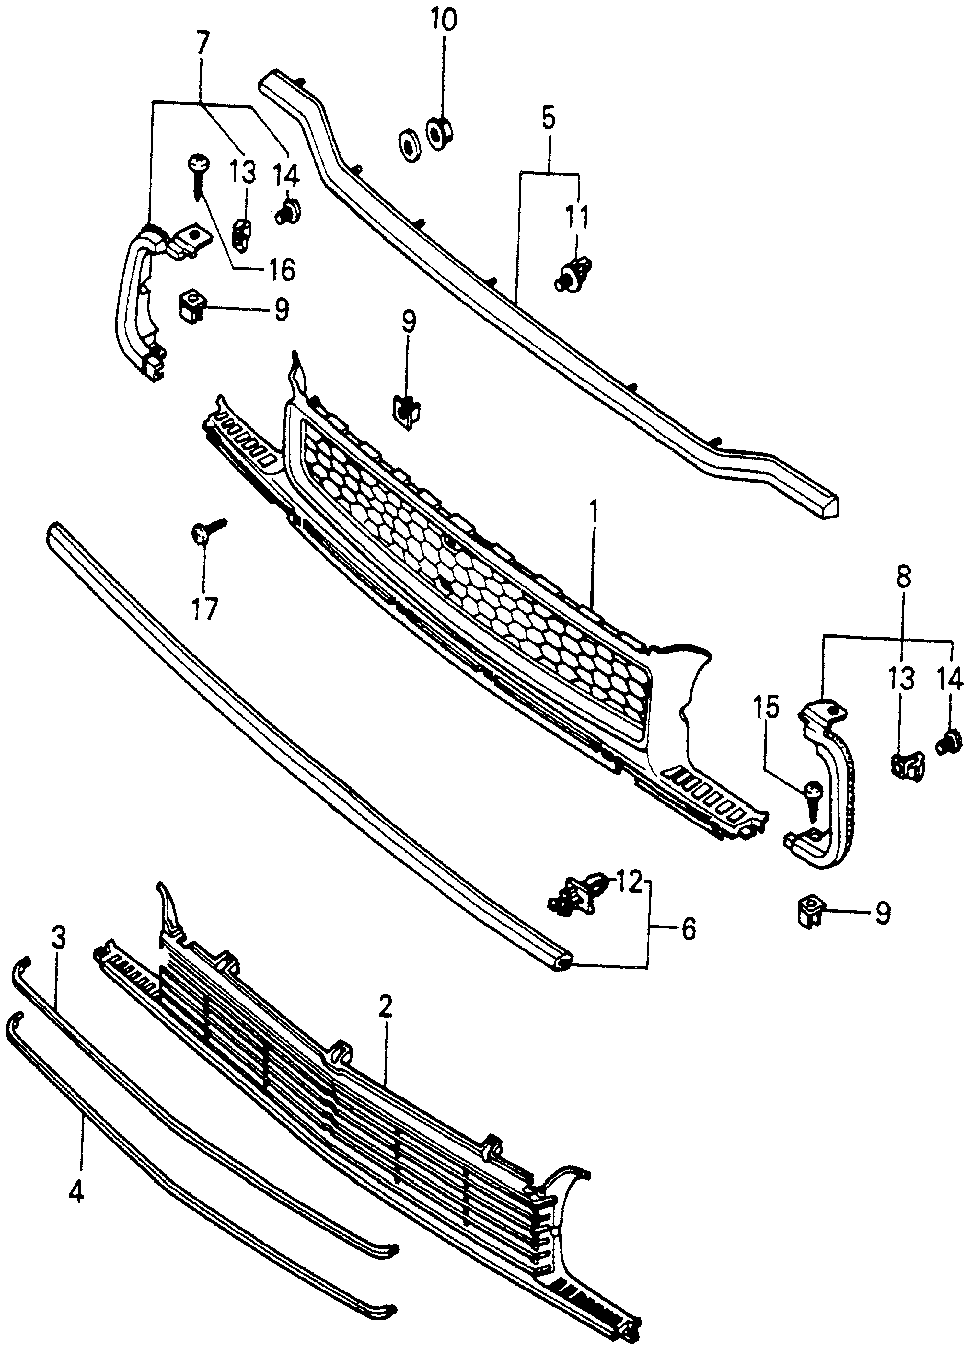 62316-692-000 - MOLDING A, FR. GRILLE